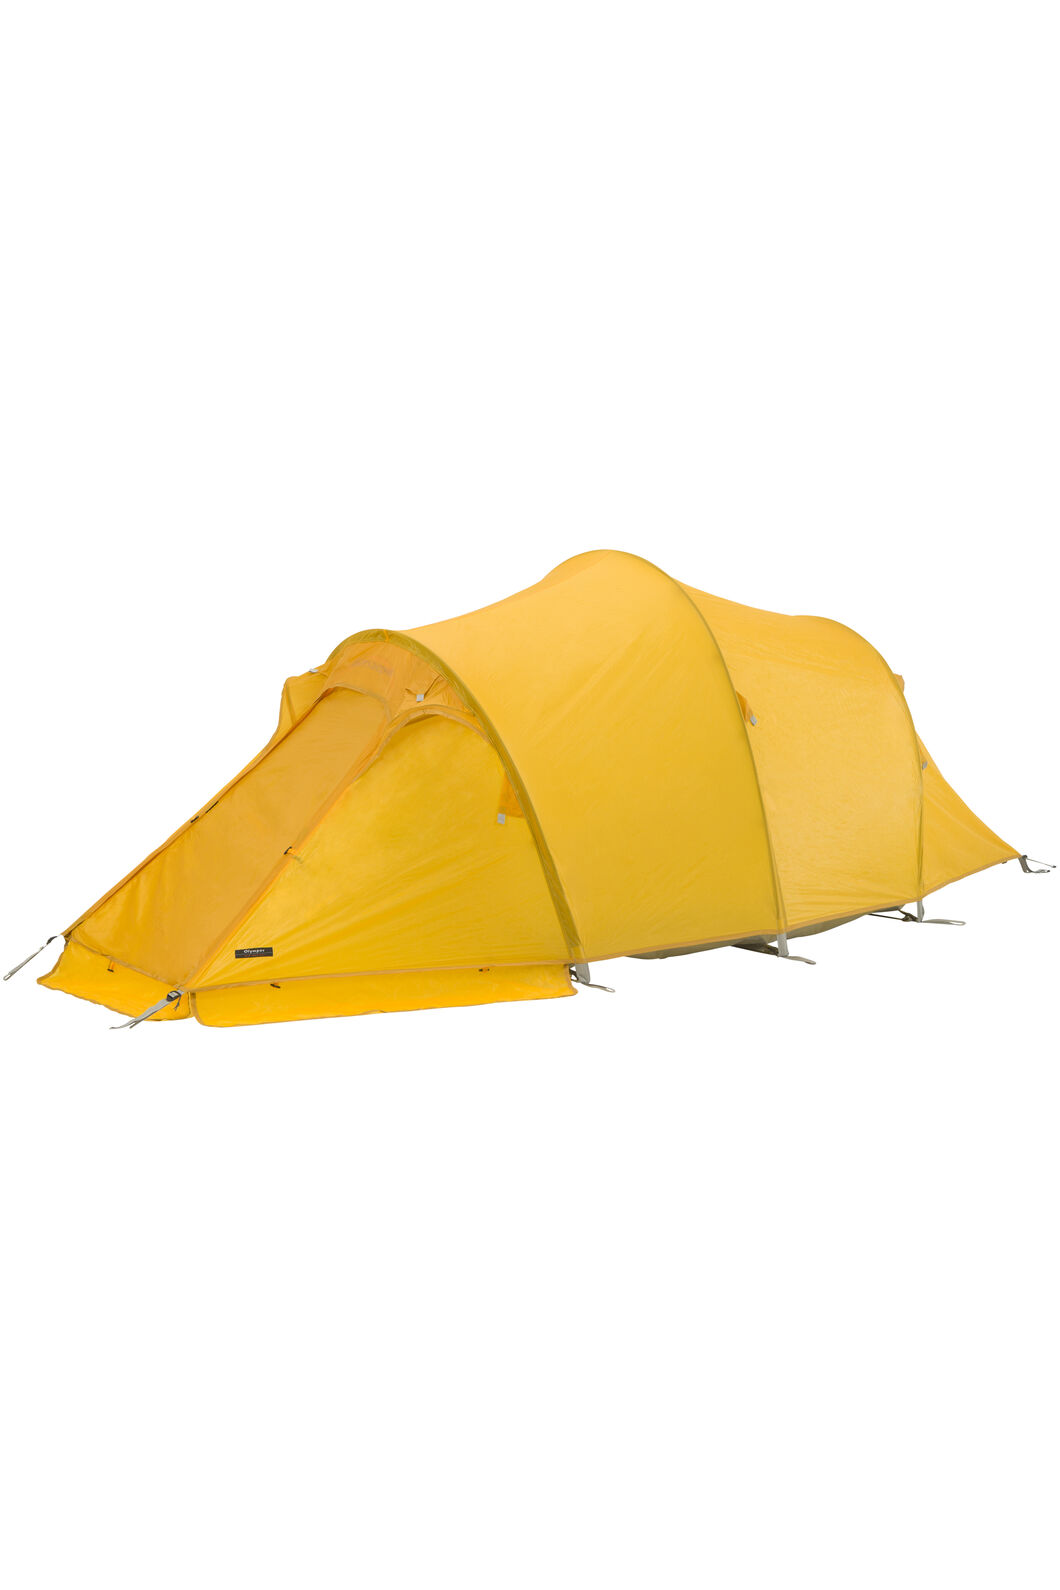 Macpac Olympus 2 Person Tent, Spectra Yellow, hi-res